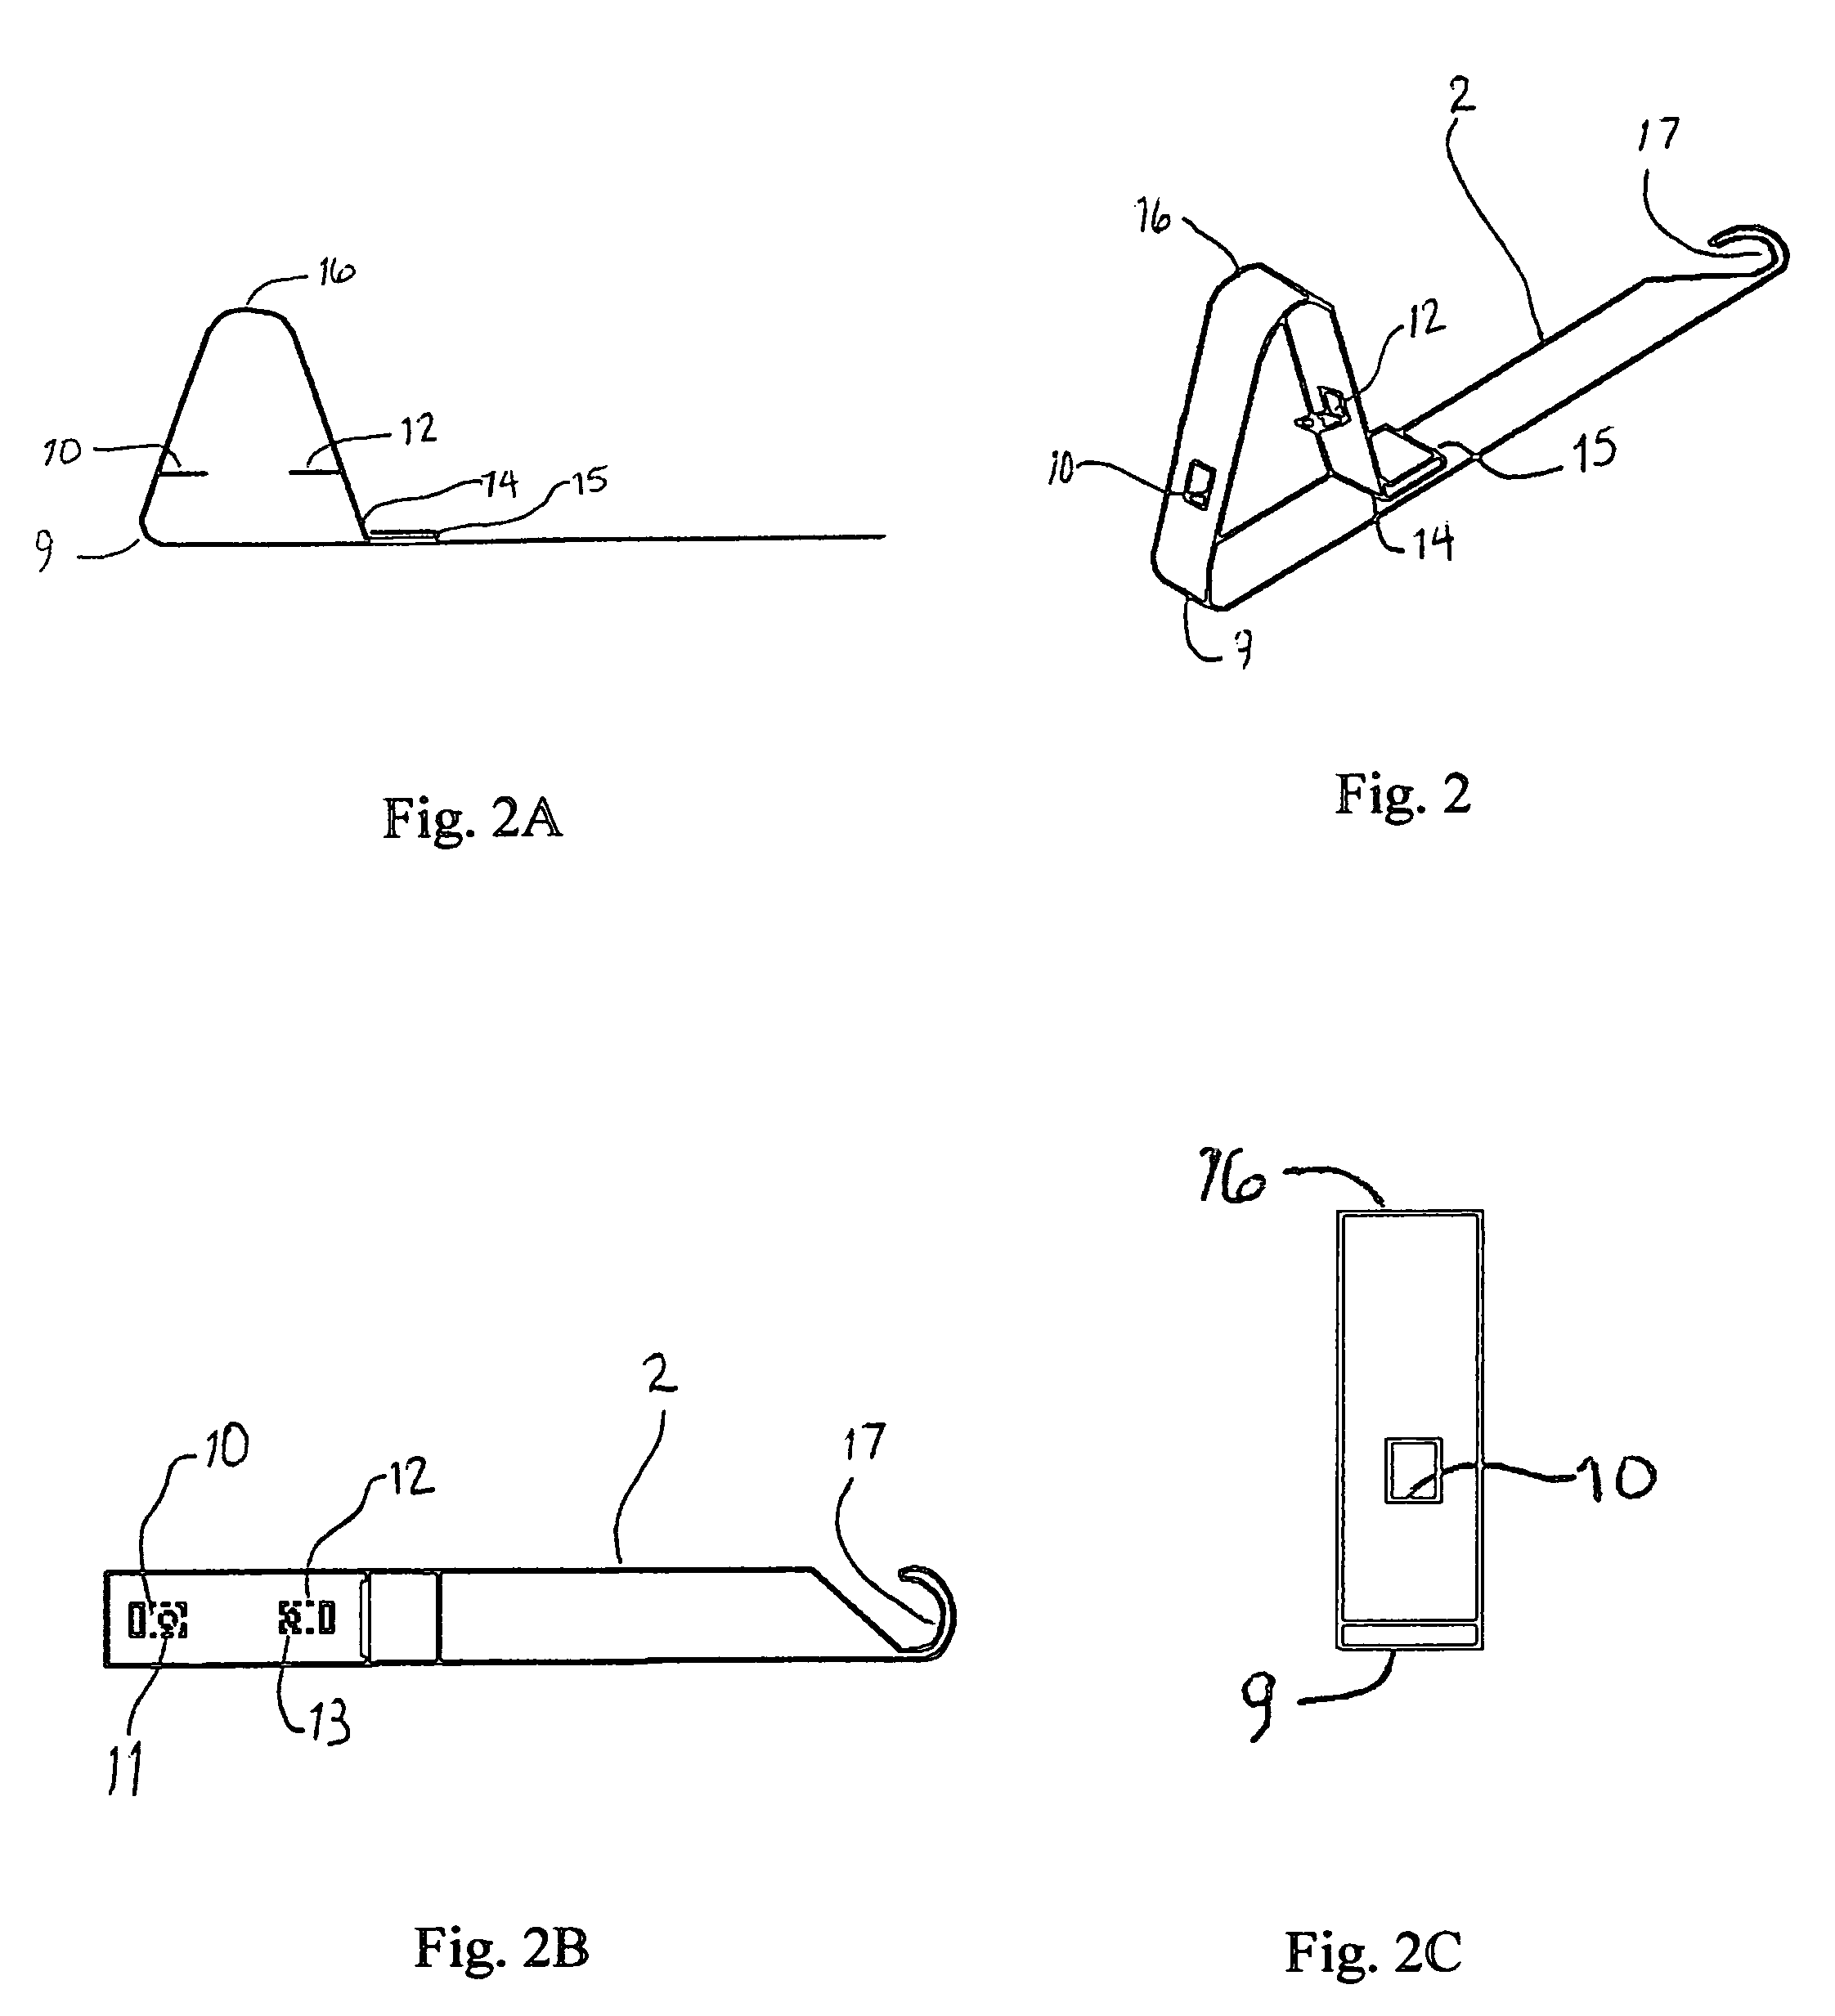 Bolt and screw holding tool to aide in assembly or disassembly process